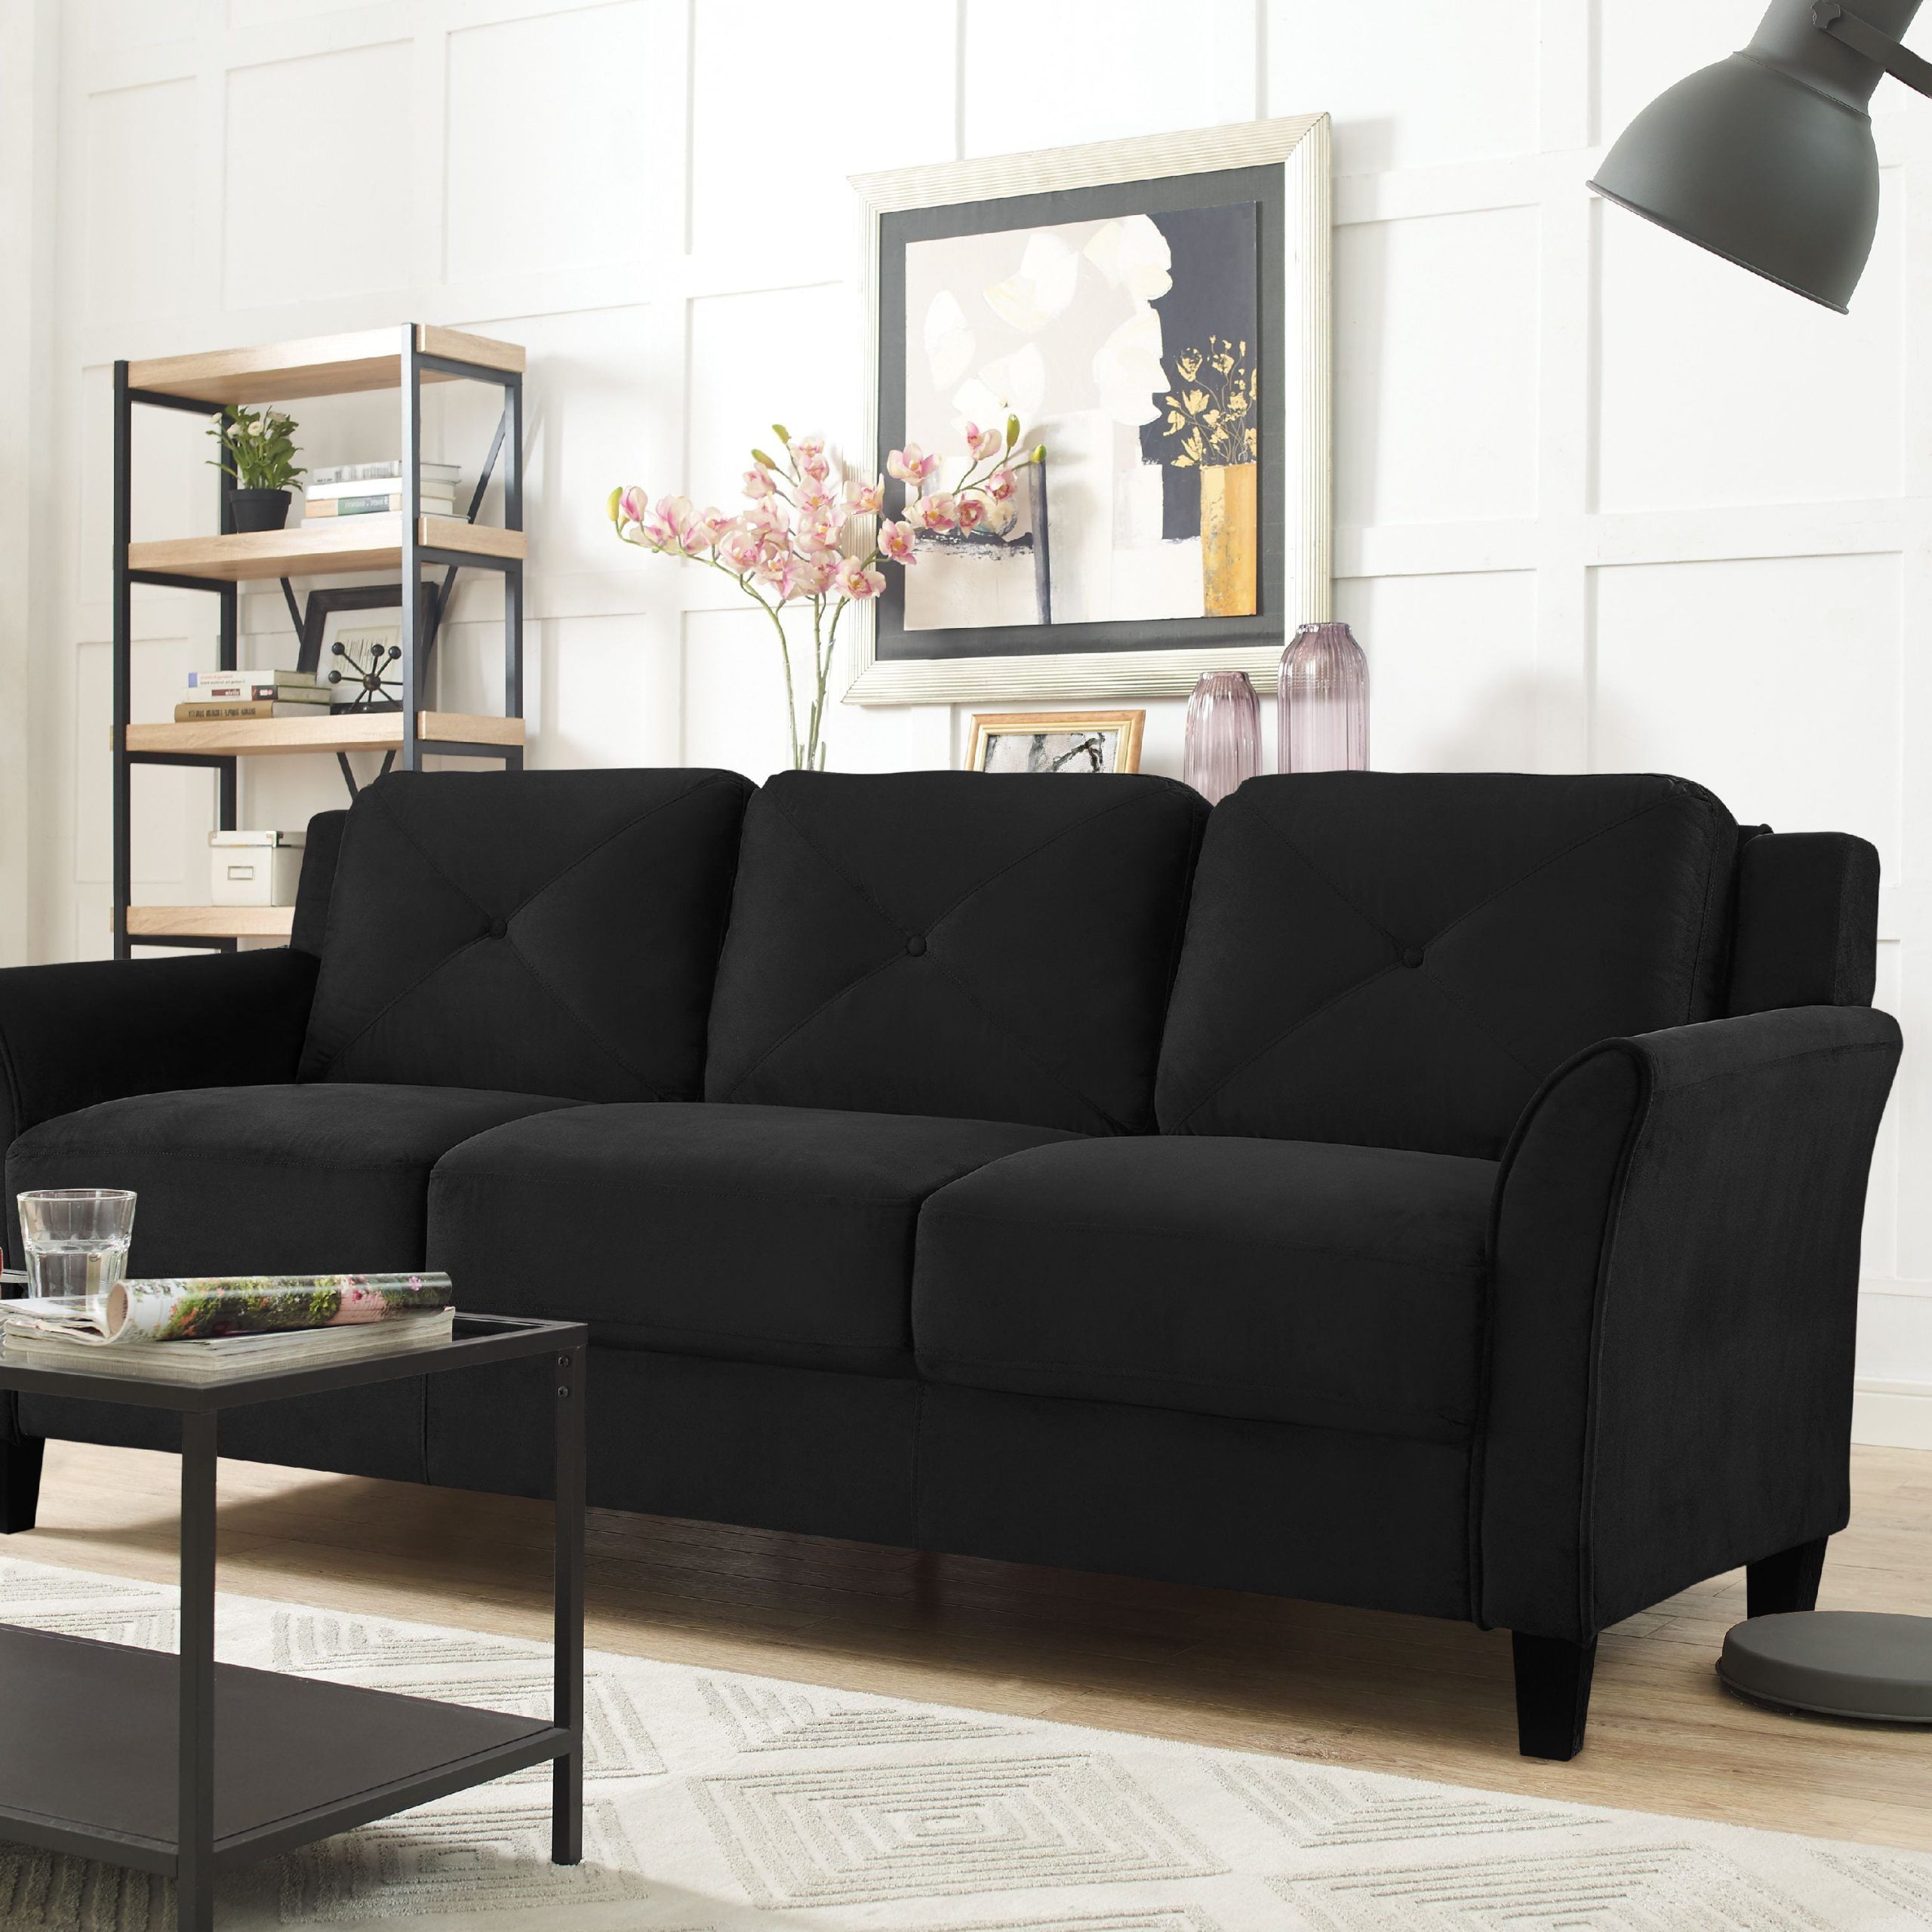 Lifestyle Solutions Taryn Curved Arm Fabric Sofa, Black – Walmart Intended For Sofas With Curved Arms (View 4 of 20)